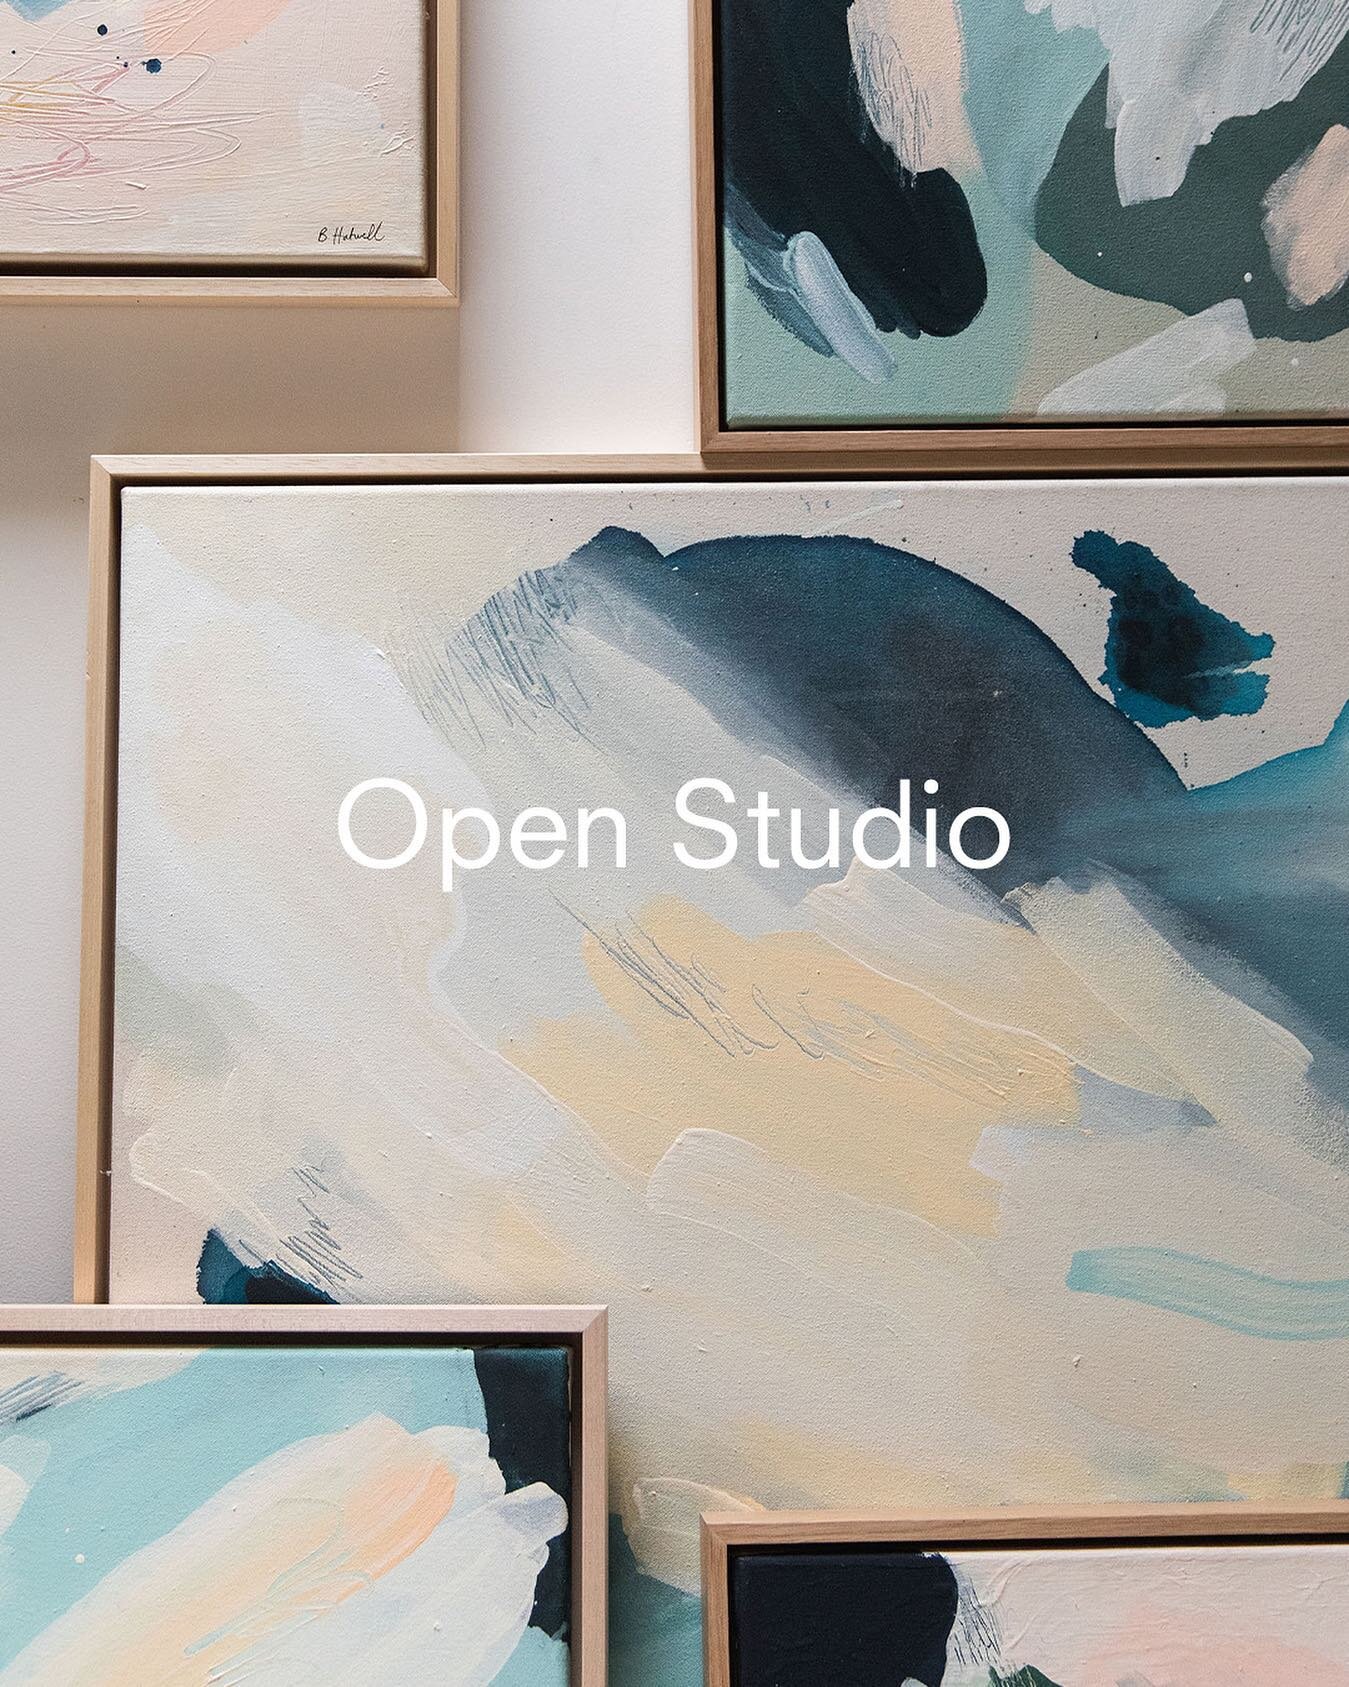 As you may have already seen on my stories, we&rsquo;re holding an open studios evening. Come and say hey, browse my latest collection over and see some more work from fellow studios! 

Thurs 23rd June

6-10pm 

Cell Studios,
34 Forest Business Park,